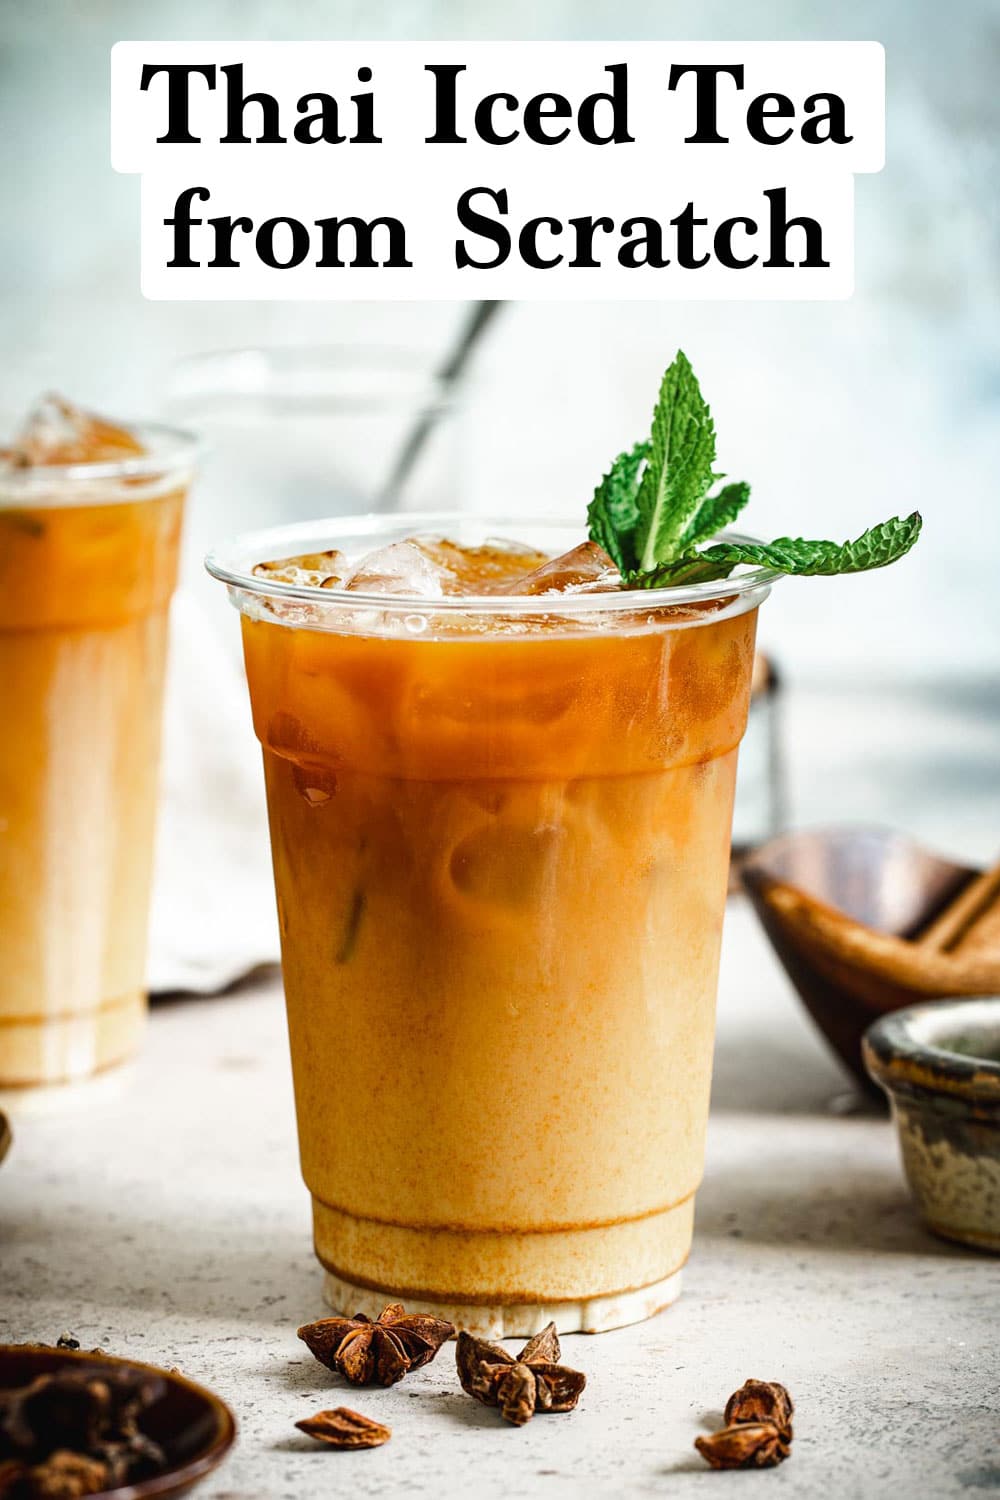 Thai iced tea from scratch in a plastic cup topped with mint leaves.